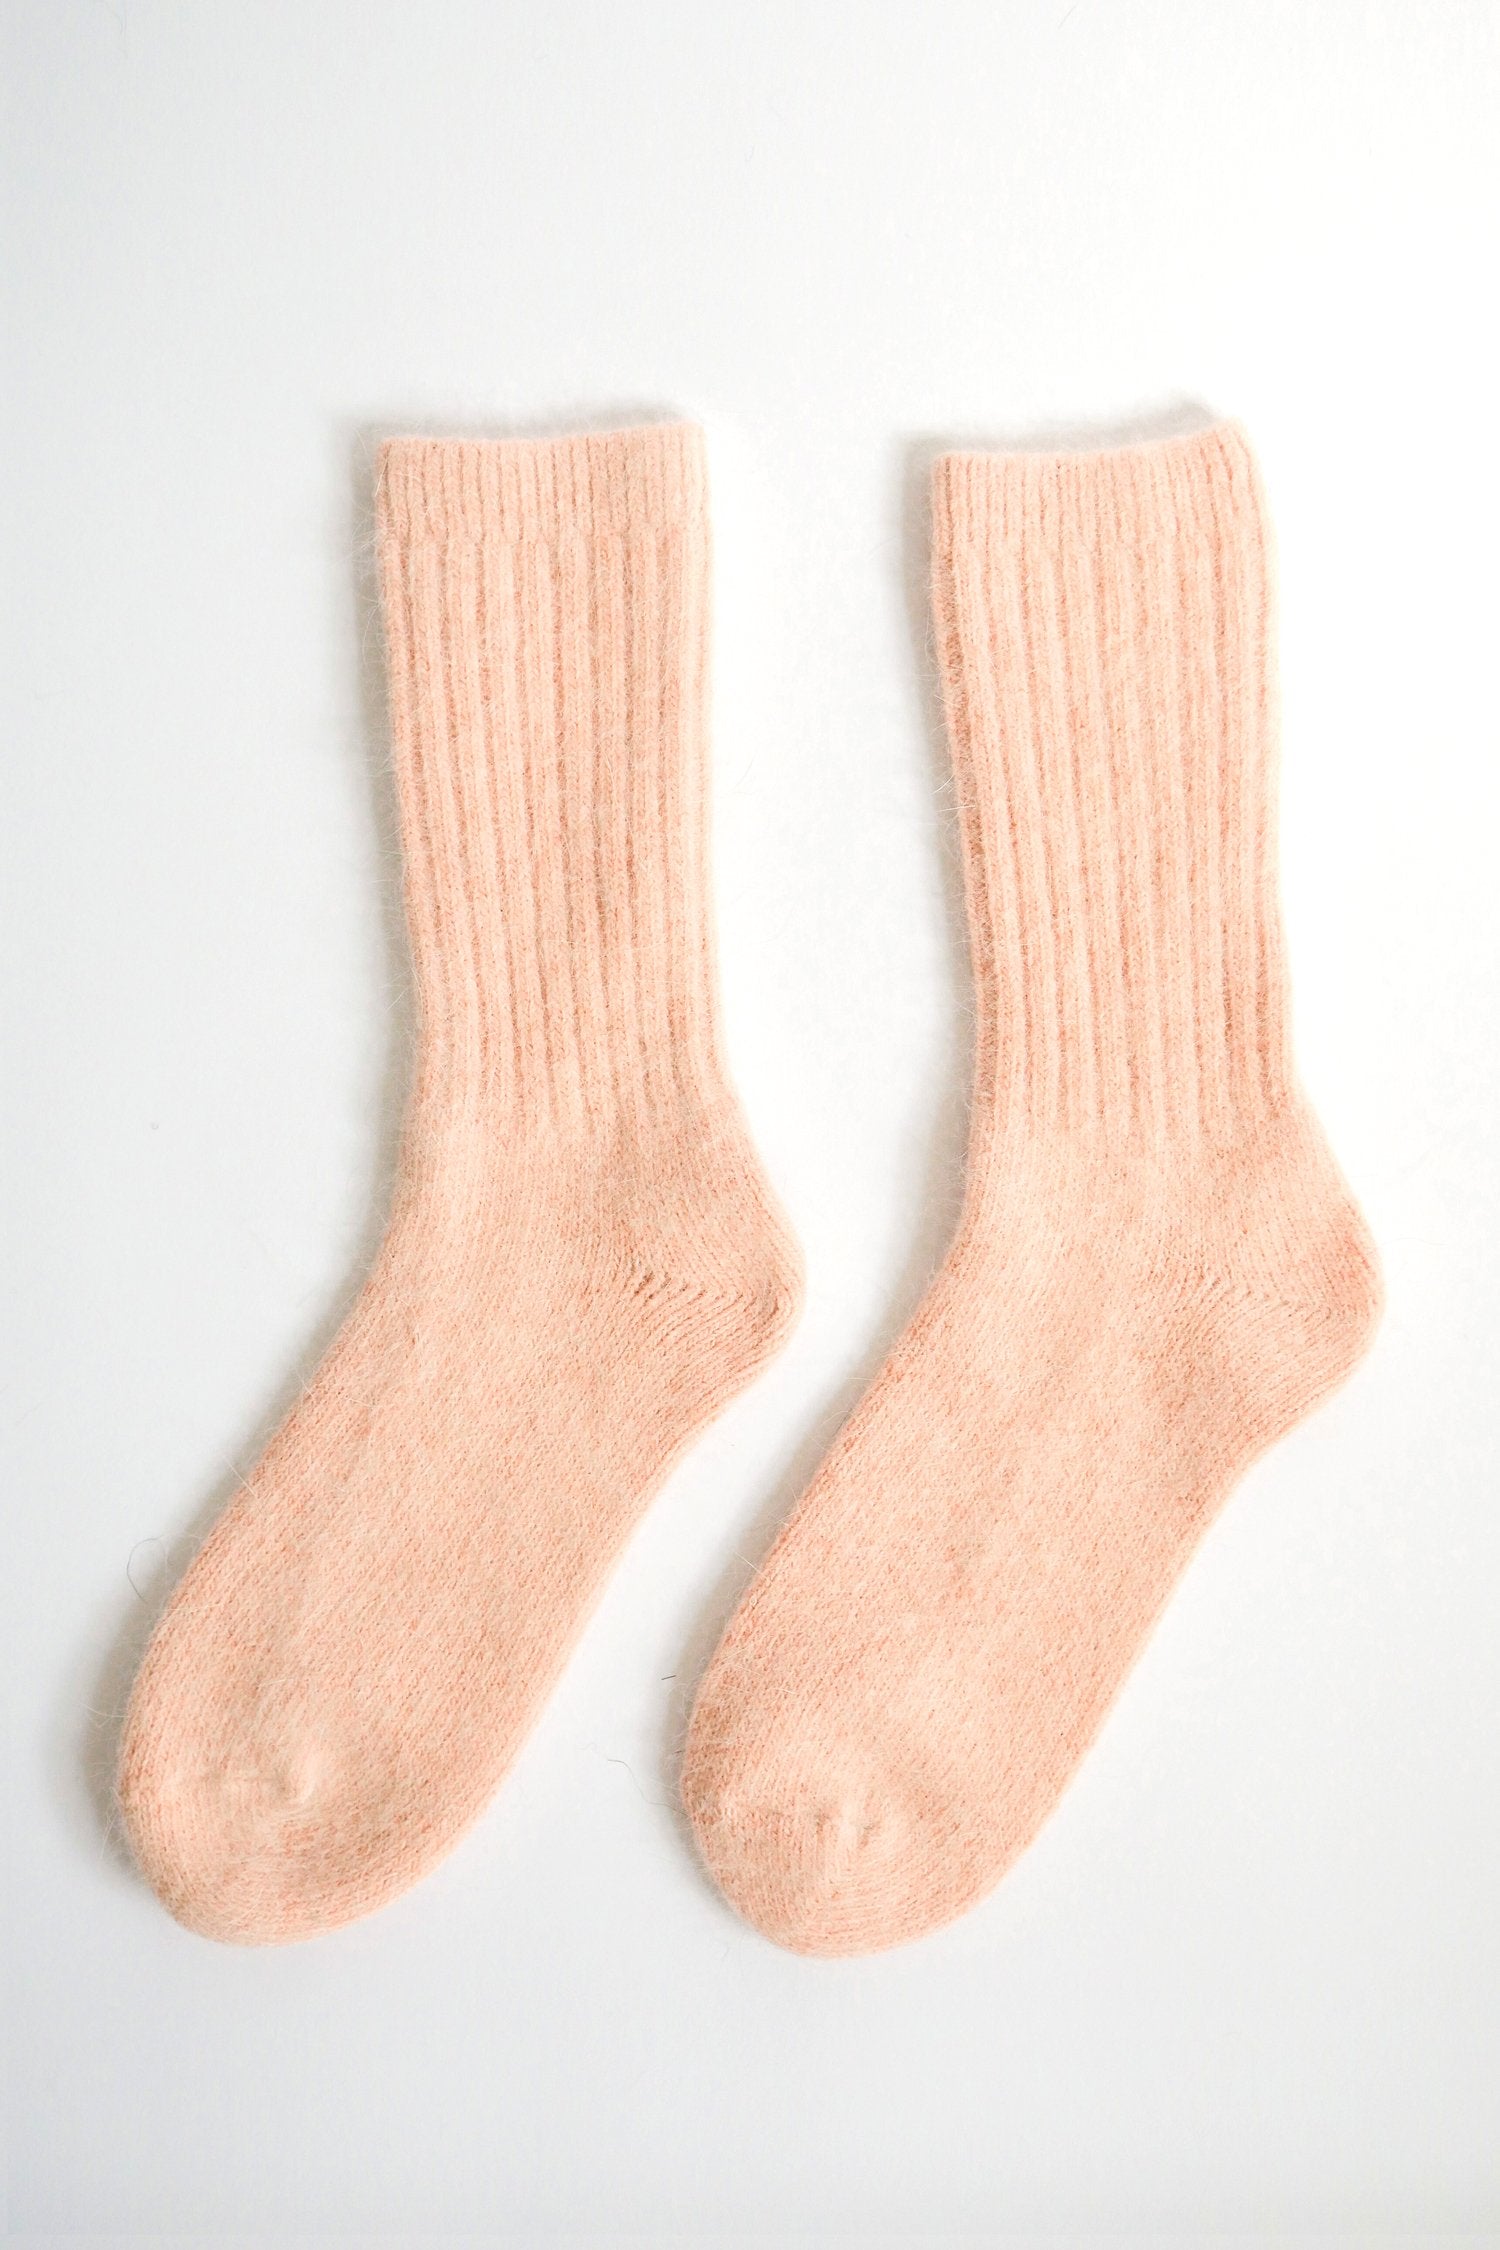 Skies For Miles soft Angora wool socks in peach color